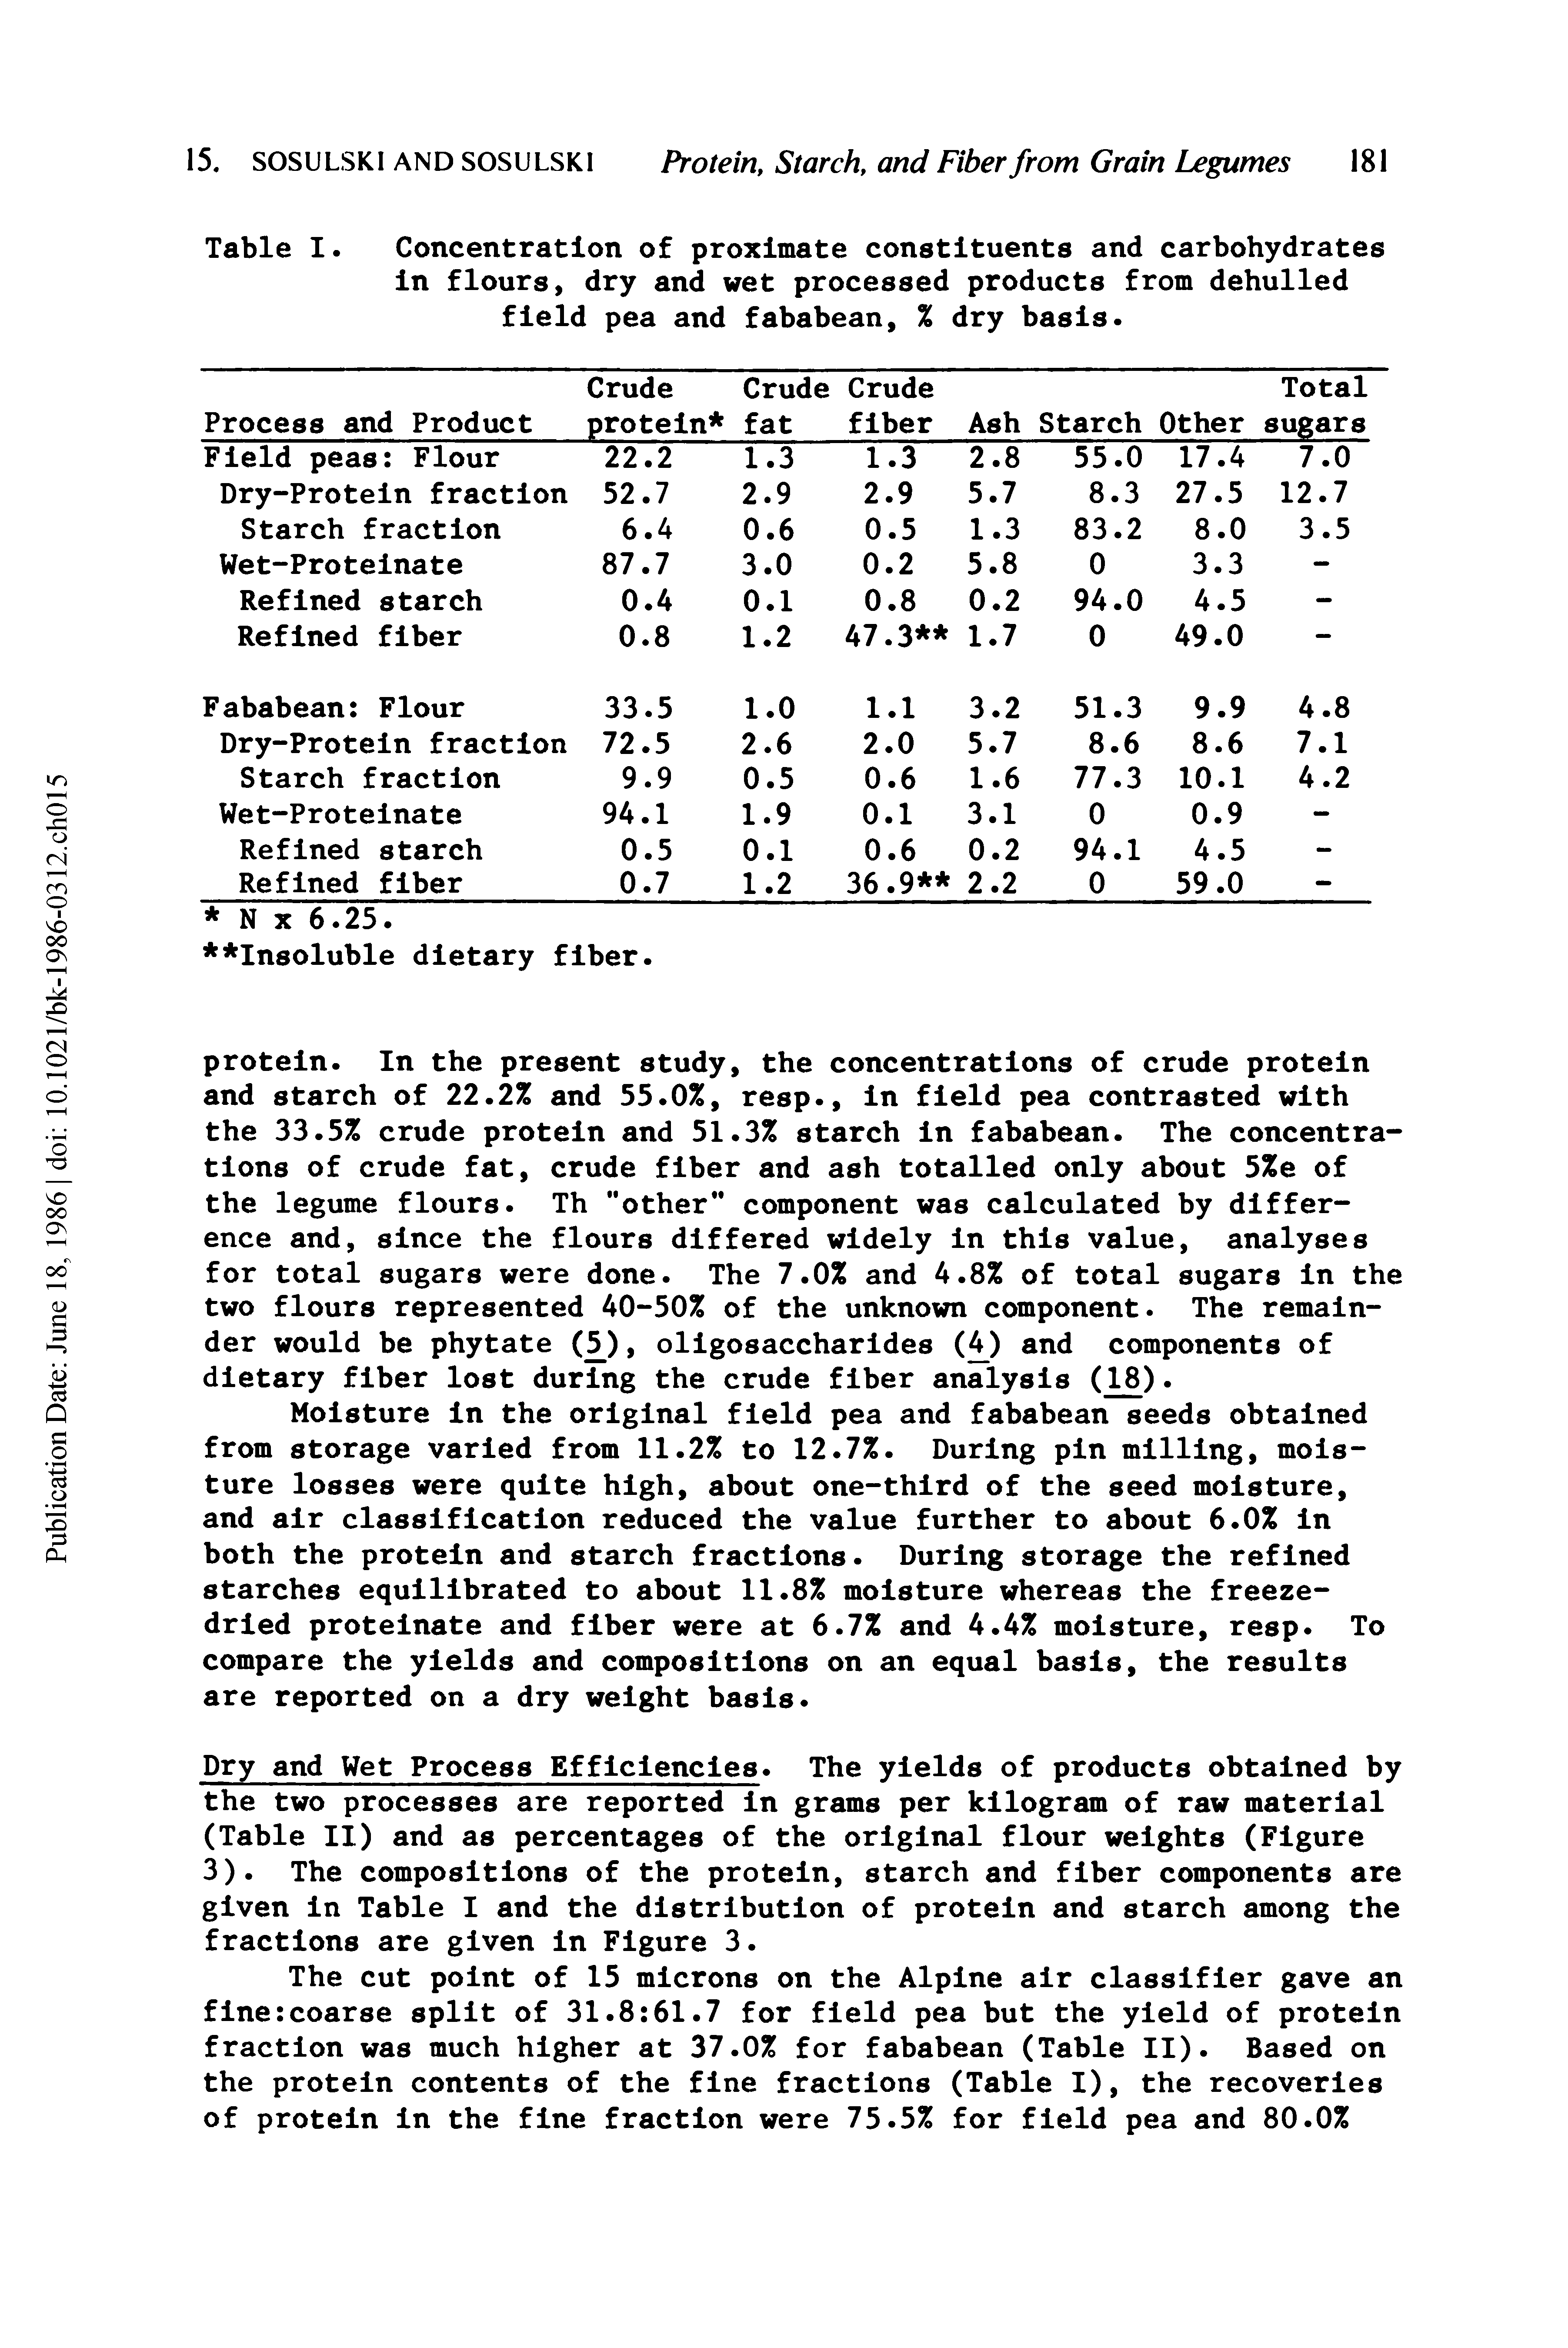 Table I. Concentration of proximate constituents and carbohydrates in flours, dry and wet processed products from dehulled field pea and fababean, % dry basis.